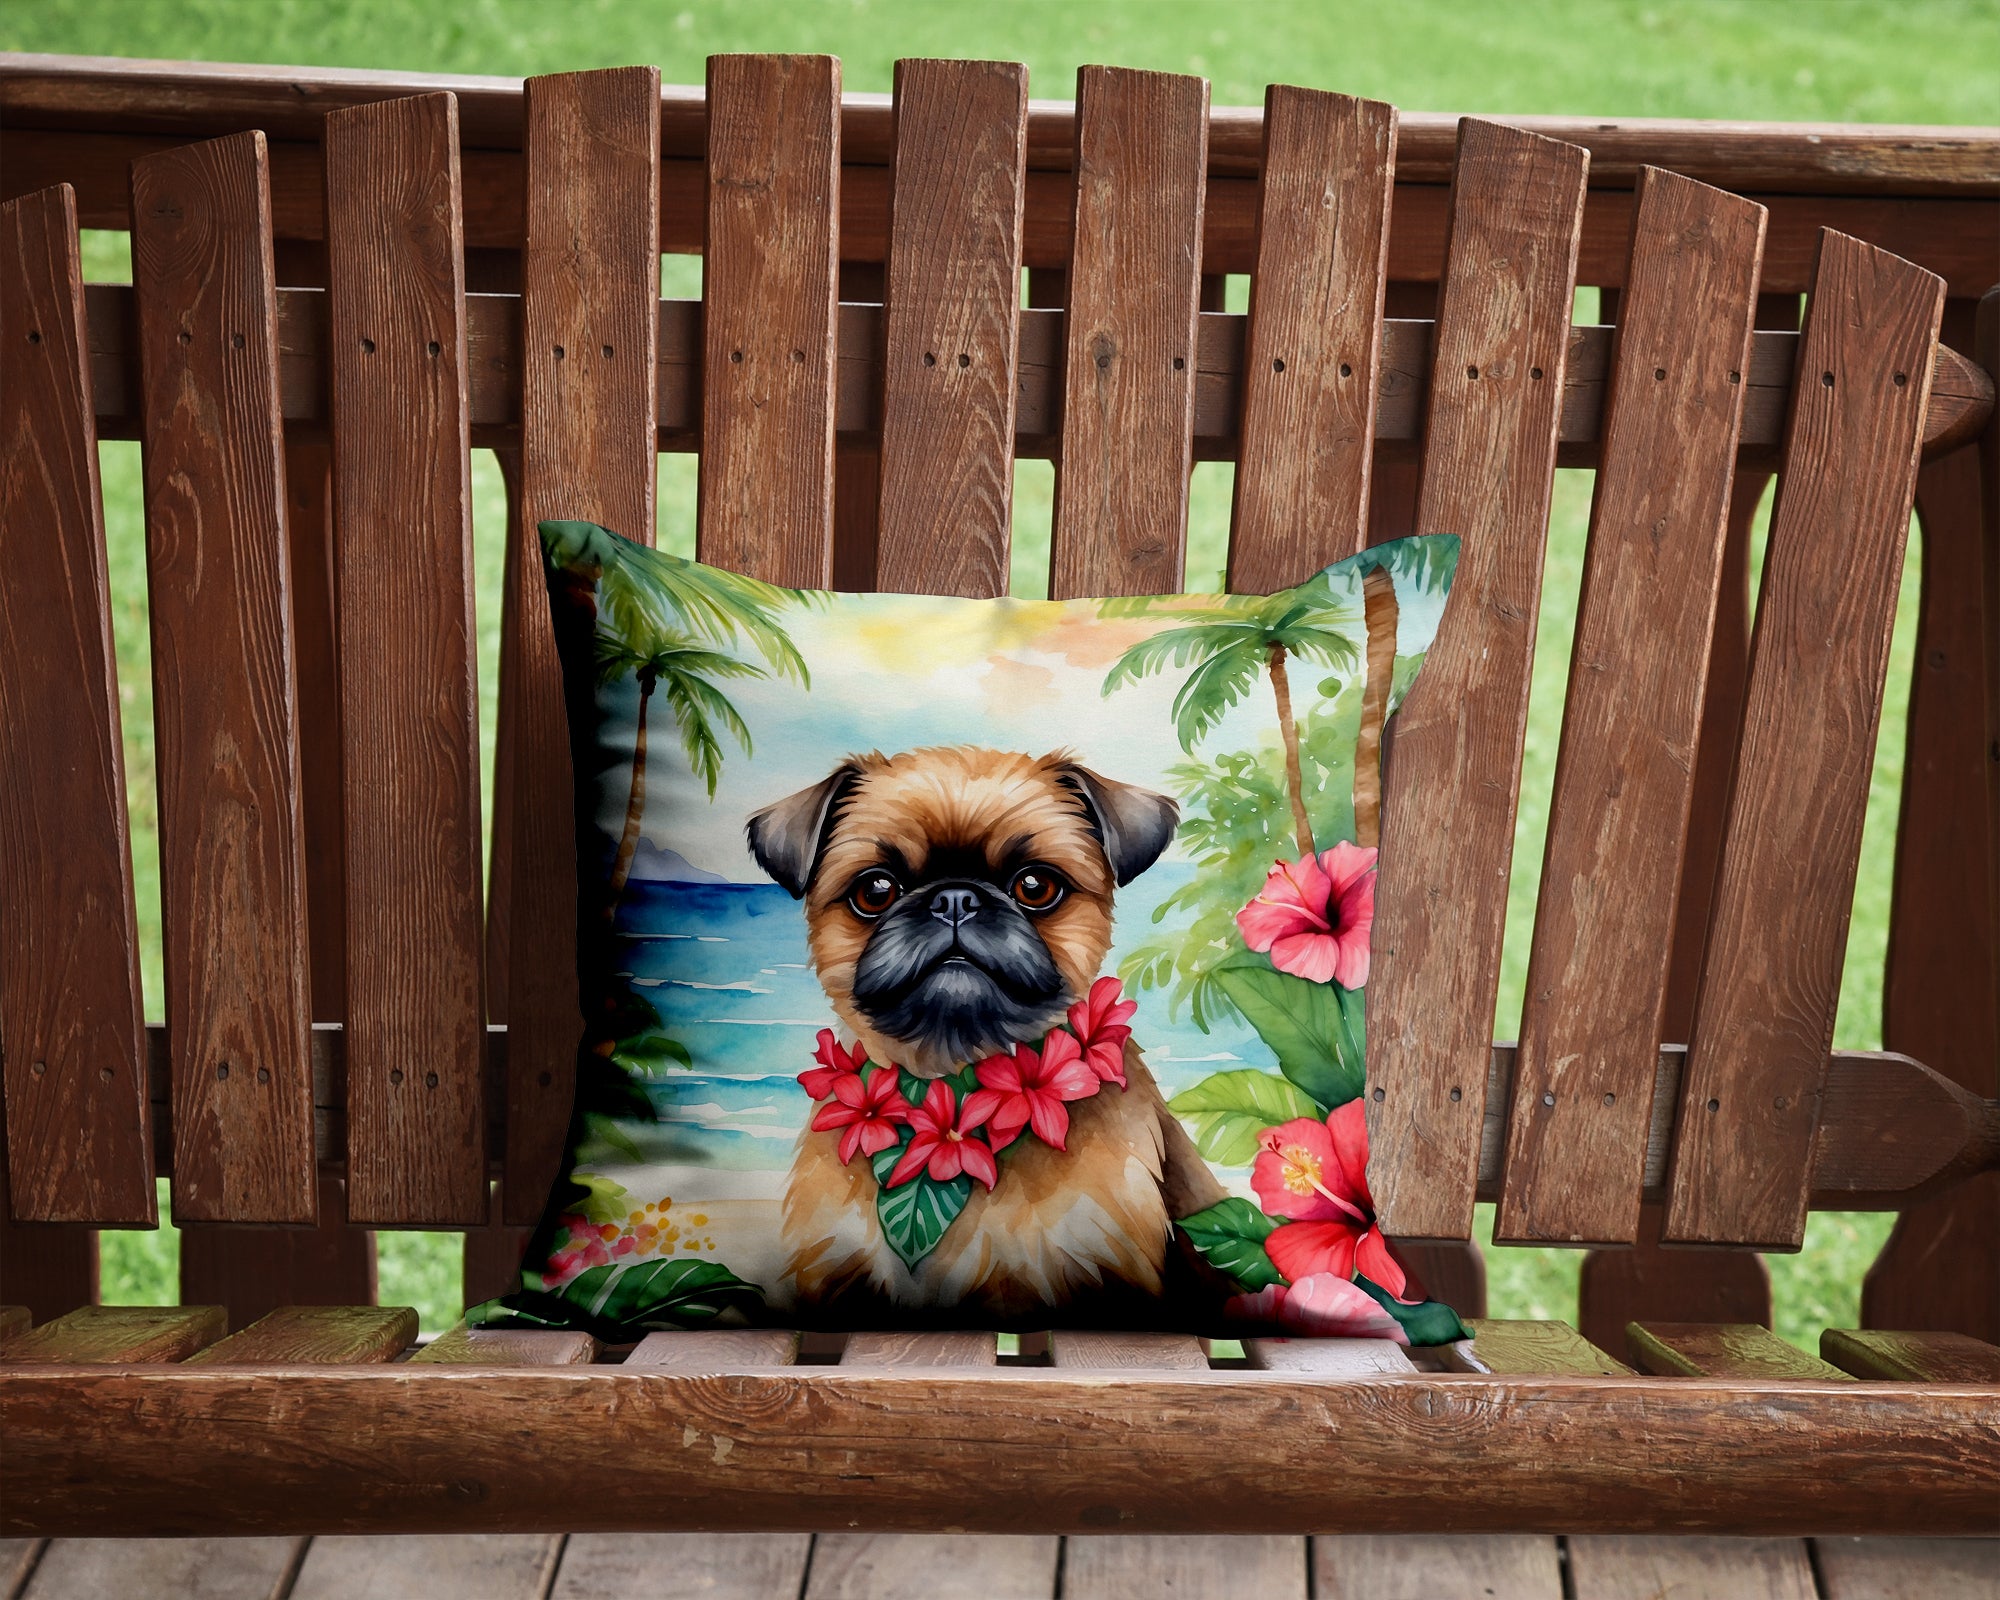 Buy this Brussels Griffon Luau Throw Pillow